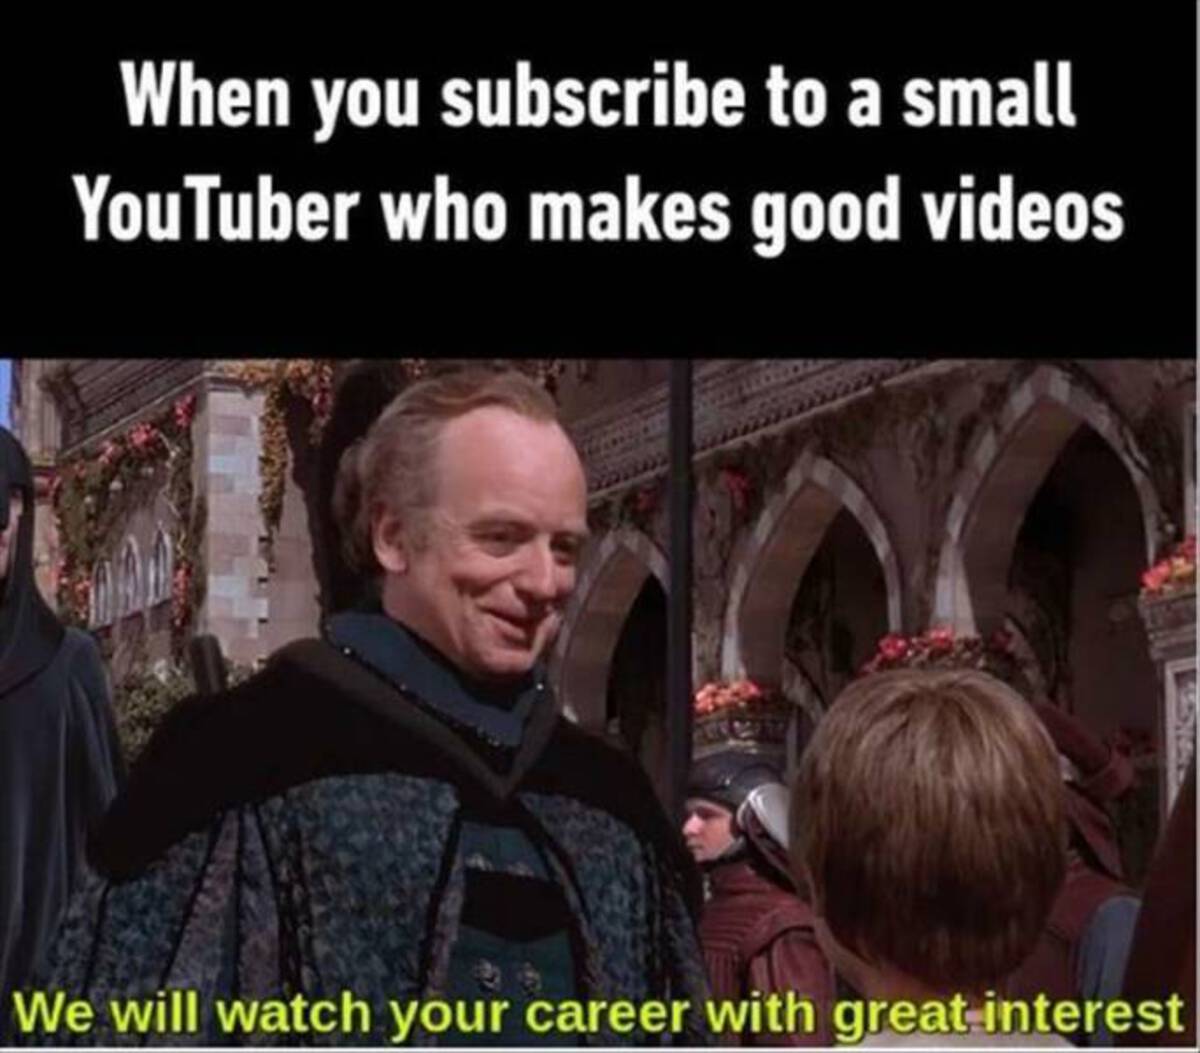 photo caption - When you subscribe to a small YouTuber who makes good videos We will watch your career with great interest